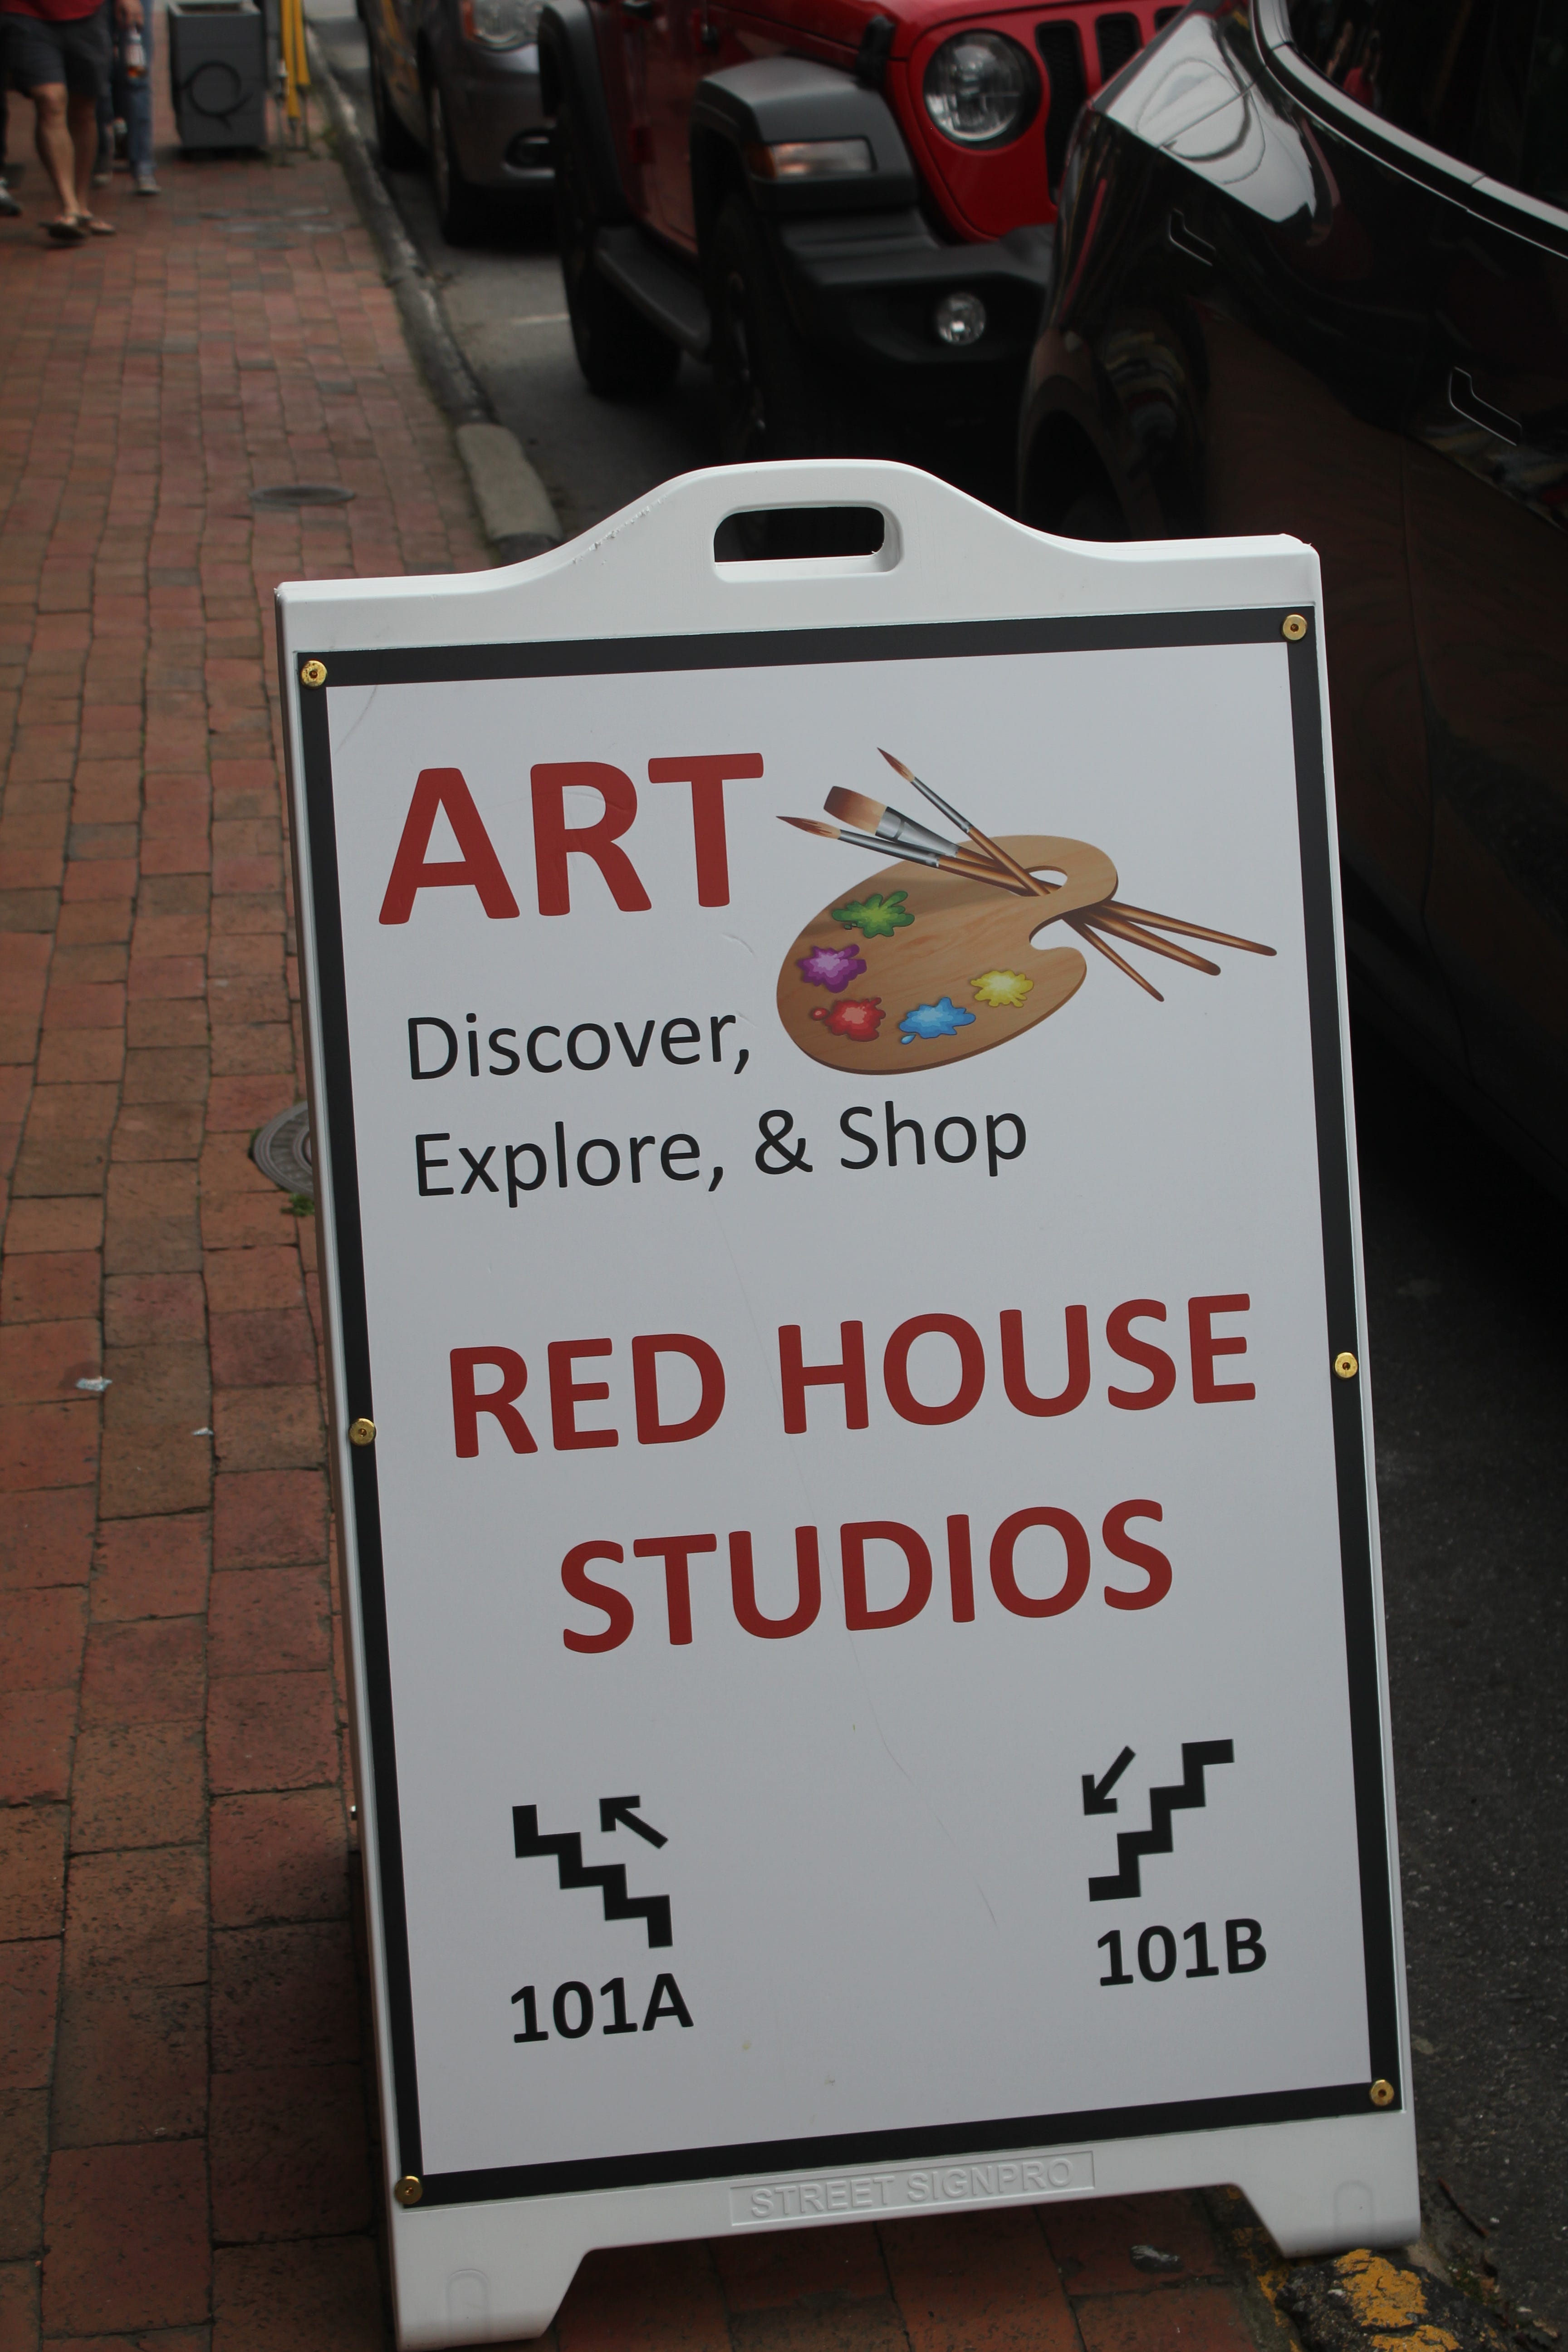 All three levels of the Red House Gallery are open every day from 10 a.m. to 5 p.m.